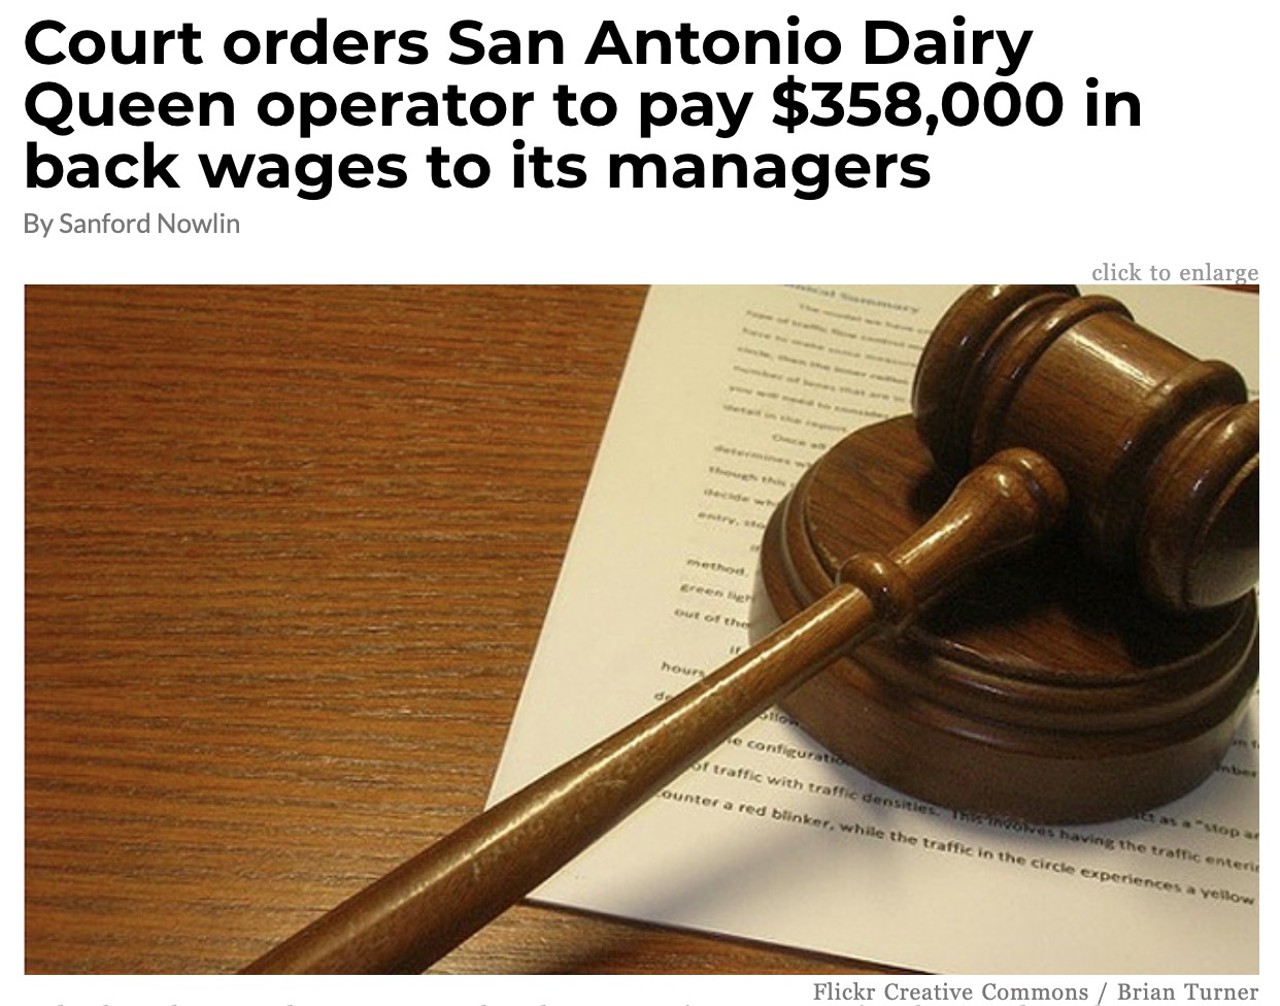 10. Court orders San Antonio Dairy Queen operator to pay $358,000 in back wages to its managers